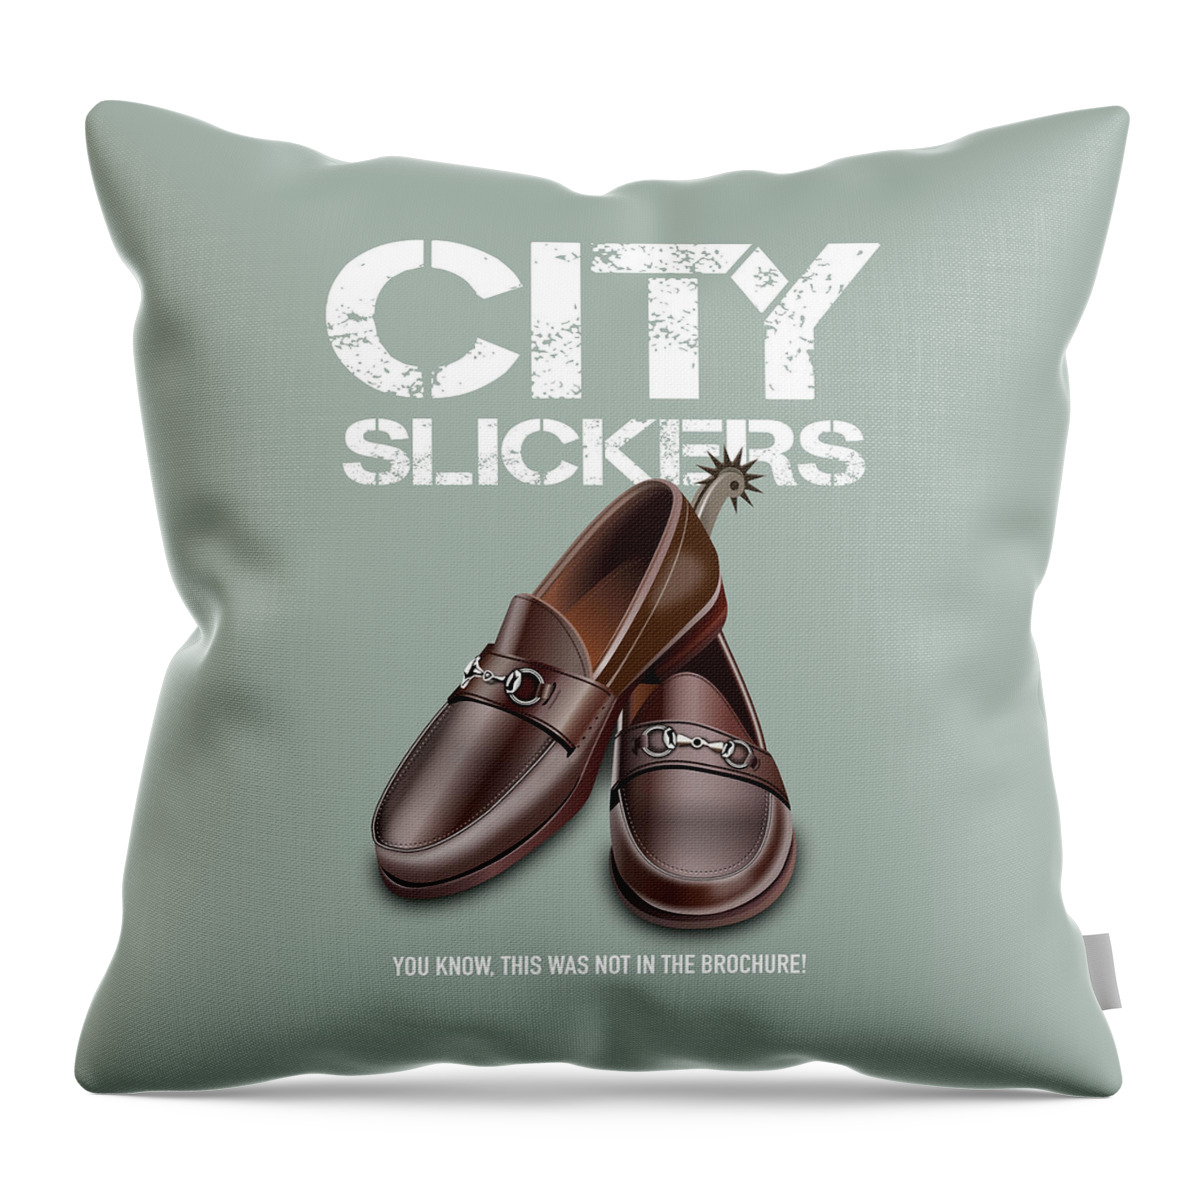 Movie Poster Throw Pillow featuring the digital art City Slickers - Alternative Movie Poster by Movie Poster Boy